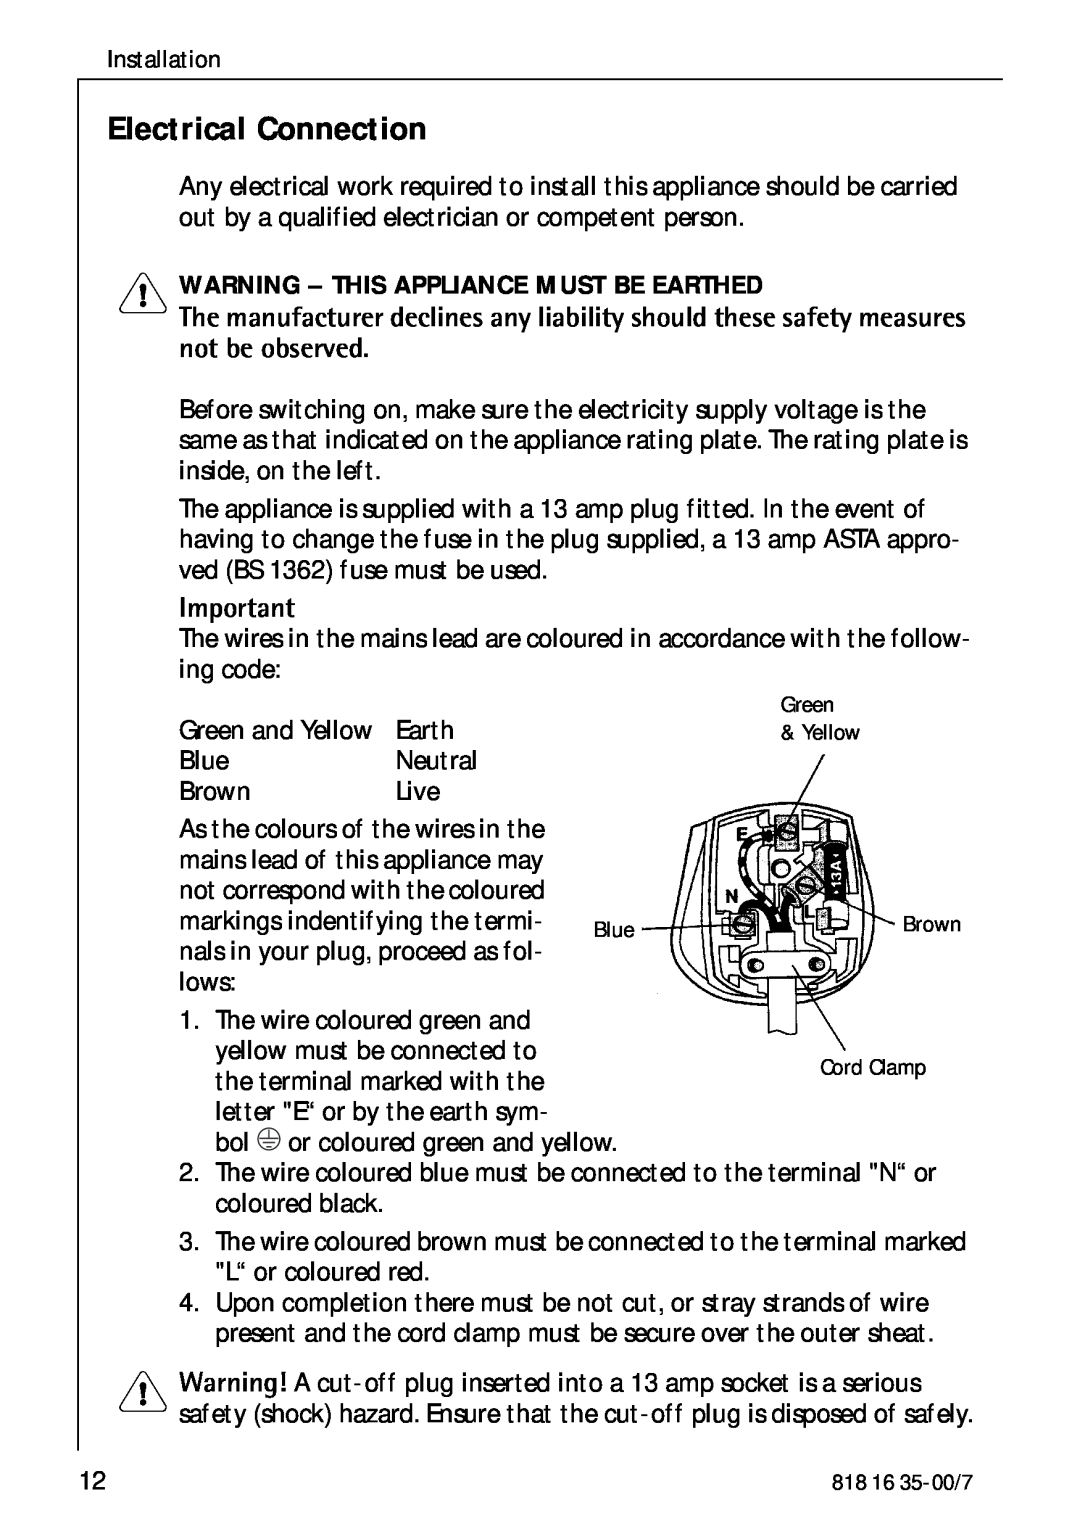 Electrolux KO_SANTO 4085 operating instructions Electrical Connection, Warning - This Appliance Must Be Earthed 